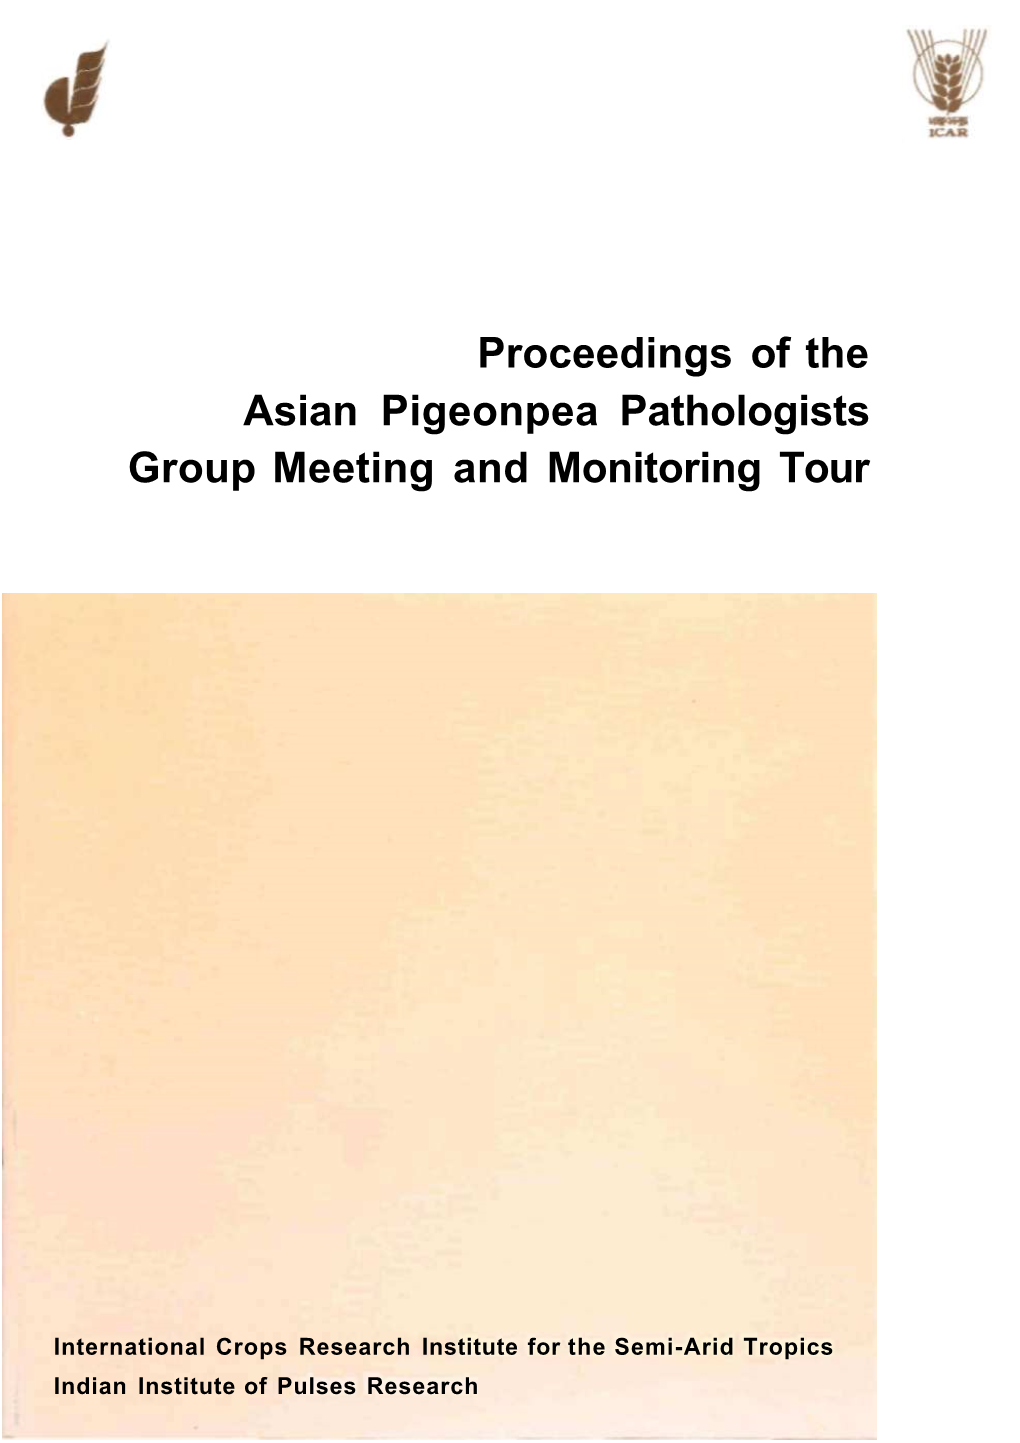 Proceedings of the Asian Pigeonpea Pathologists Group Meeting and Monitoring Tour